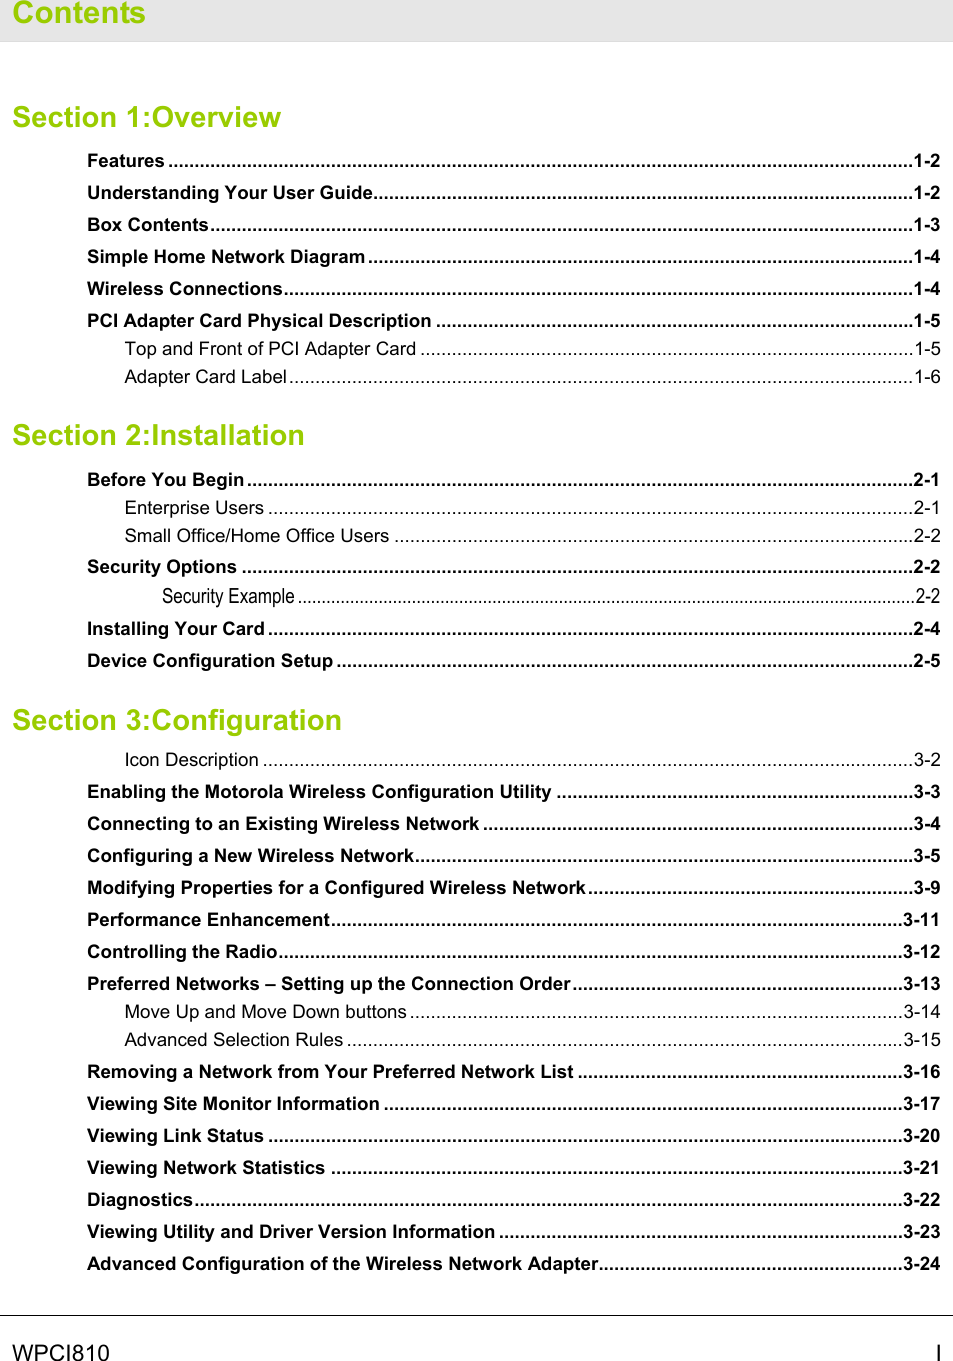   WPCI810   I Contents Section 1:Overview Features ..............................................................................................................................................1-2 Understanding Your User Guide.......................................................................................................1-2 Box Contents......................................................................................................................................1-3 Simple Home Network Diagram ........................................................................................................1-4 Wireless Connections........................................................................................................................1-4 PCI Adapter Card Physical Description ...........................................................................................1-5 Top and Front of PCI Adapter Card ..............................................................................................1-5 Adapter Card Label.......................................................................................................................1-6 Section 2:Installation Before You Begin ...............................................................................................................................2-1 Enterprise Users ...........................................................................................................................2-1 Small Office/Home Office Users ...................................................................................................2-2 Security Options ................................................................................................................................2-2 Security Example ..................................................................................................................................2-2 Installing Your Card ...........................................................................................................................2-4 Device Configuration Setup ..............................................................................................................2-5 Section 3:Configuration Icon Description ............................................................................................................................3-2 Enabling the Motorola Wireless Configuration Utility ....................................................................3-3 Connecting to an Existing Wireless Network ..................................................................................3-4 Configuring a New Wireless Network...............................................................................................3-5 Modifying Properties for a Configured Wireless Network..............................................................3-9 Performance Enhancement.............................................................................................................3-11 Controlling the Radio.......................................................................................................................3-12 Preferred Networks – Setting up the Connection Order...............................................................3-13 Move Up and Move Down buttons ..............................................................................................3-14 Advanced Selection Rules ..........................................................................................................3-15 Removing a Network from Your Preferred Network List ..............................................................3-16 Viewing Site Monitor Information ...................................................................................................3-17 Viewing Link Status .........................................................................................................................3-20 Viewing Network Statistics .............................................................................................................3-21 Diagnostics.......................................................................................................................................3-22 Viewing Utility and Driver Version Information .............................................................................3-23 Advanced Configuration of the Wireless Network Adapter..........................................................3-24 